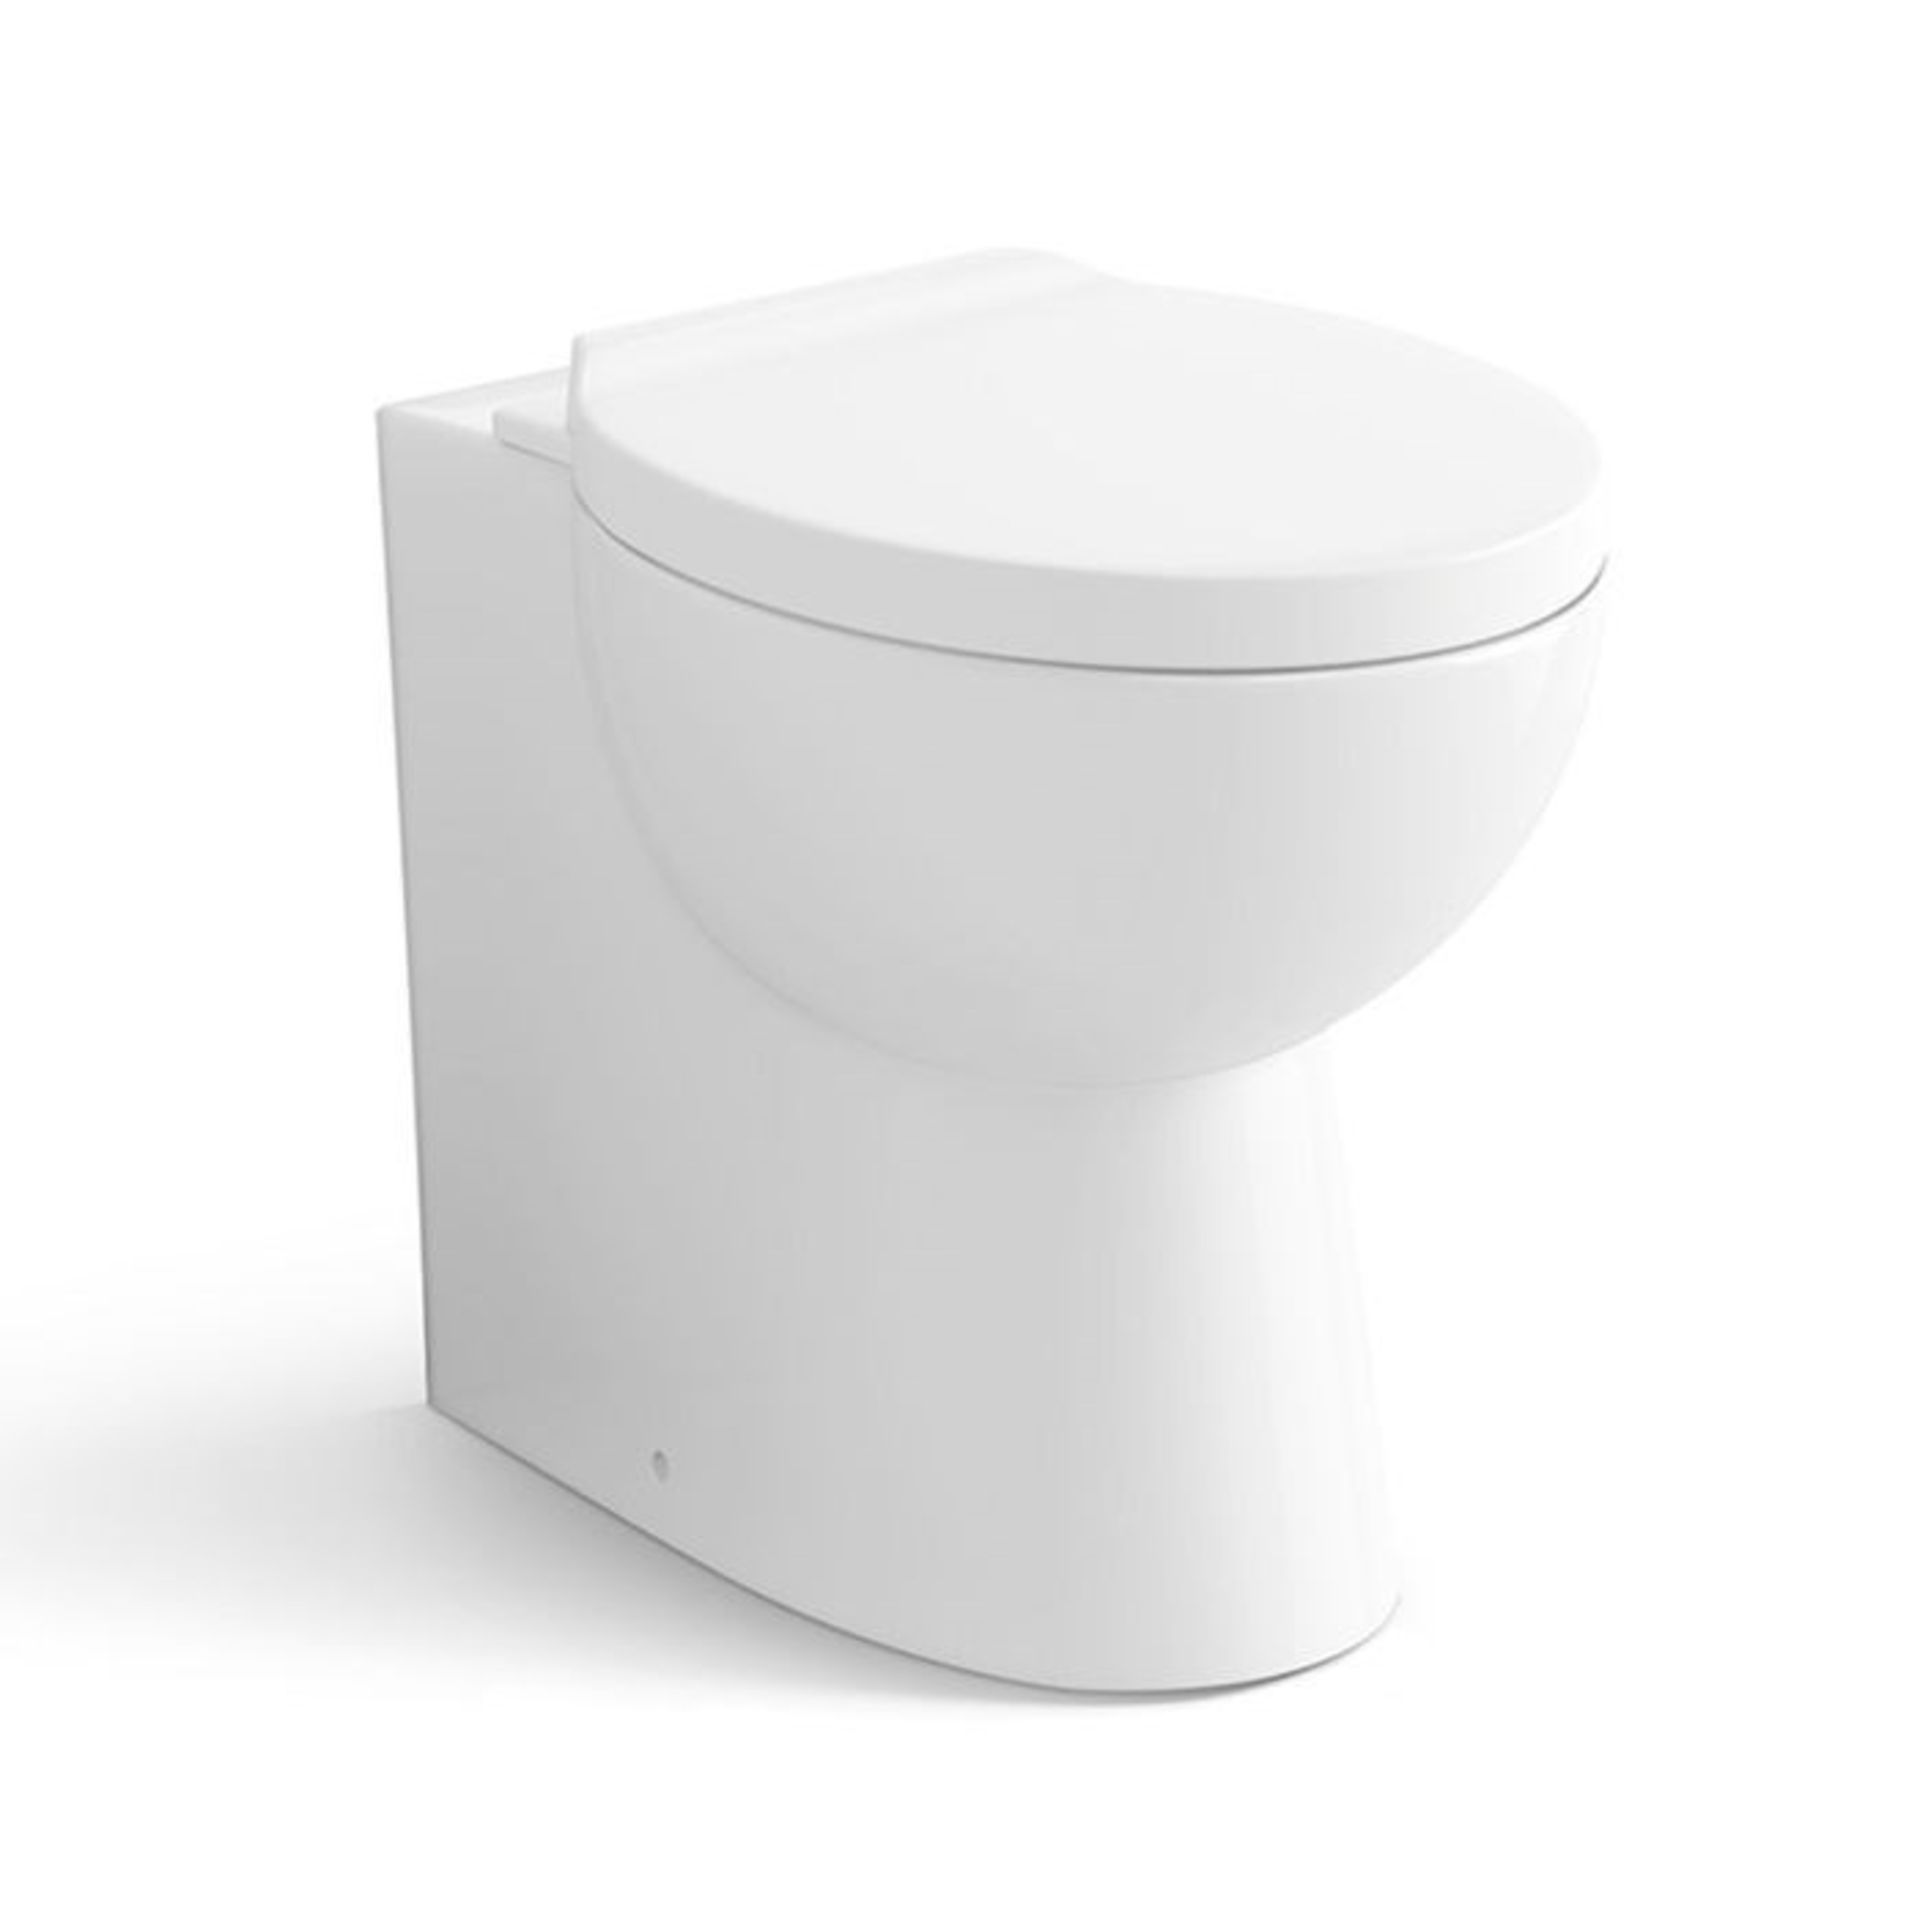 Quartz Back to Wall Toilet.Stylish design Made from White Vitreous China Finished in a high glo...